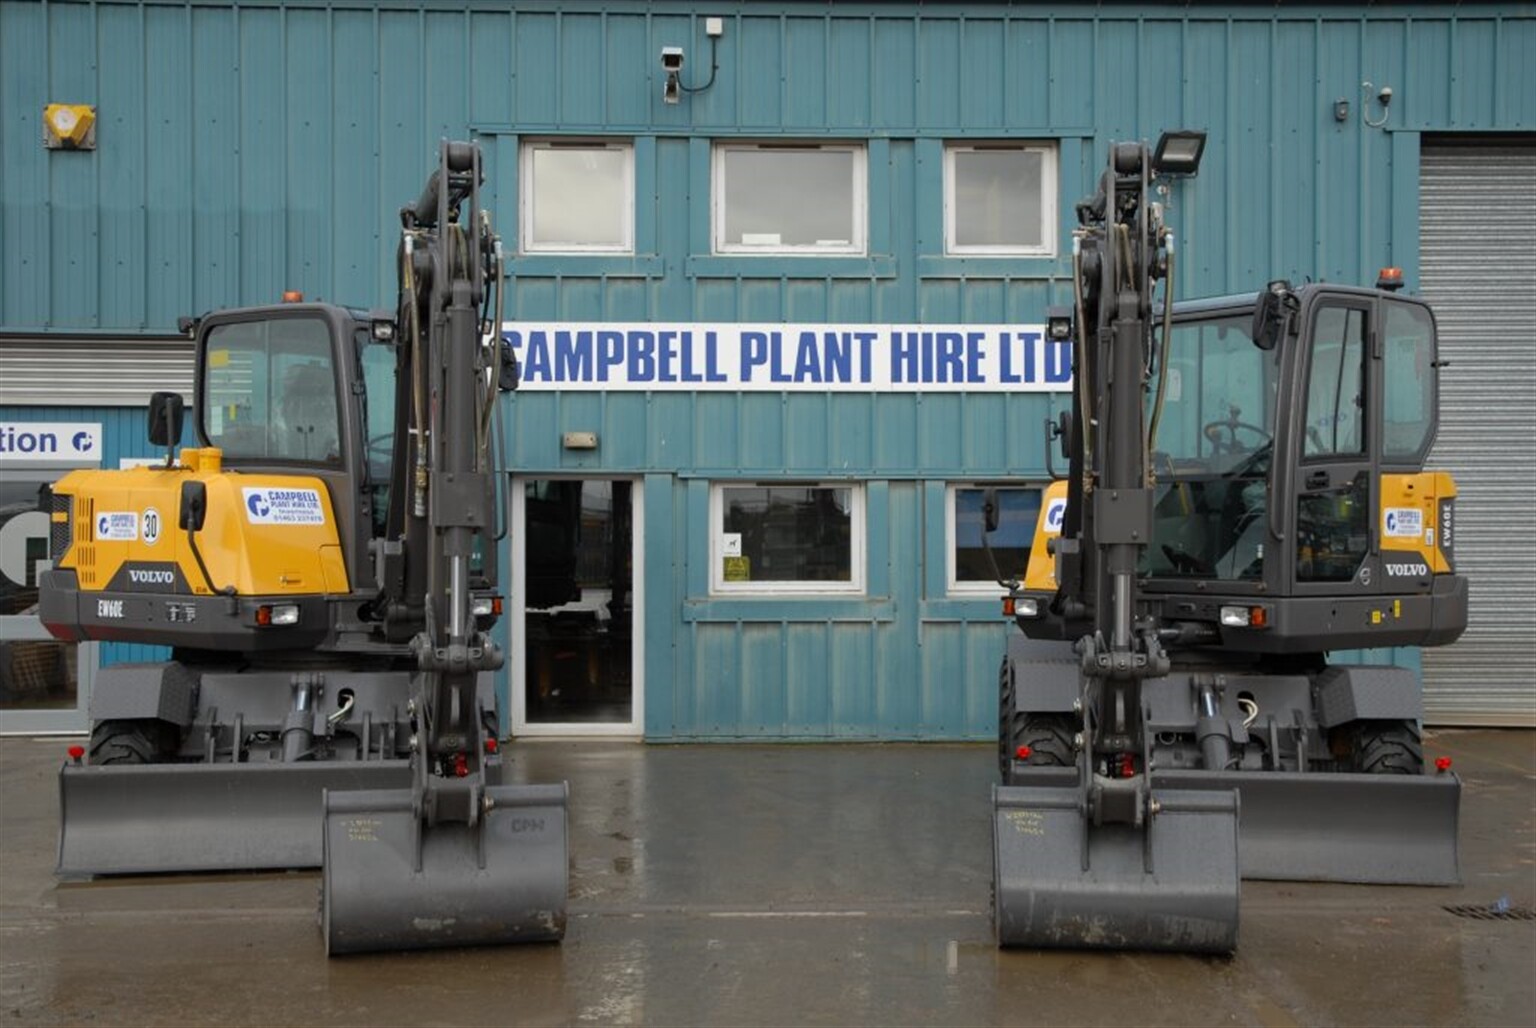 UK's First two Volvo EW60E's go to Campbell Plant